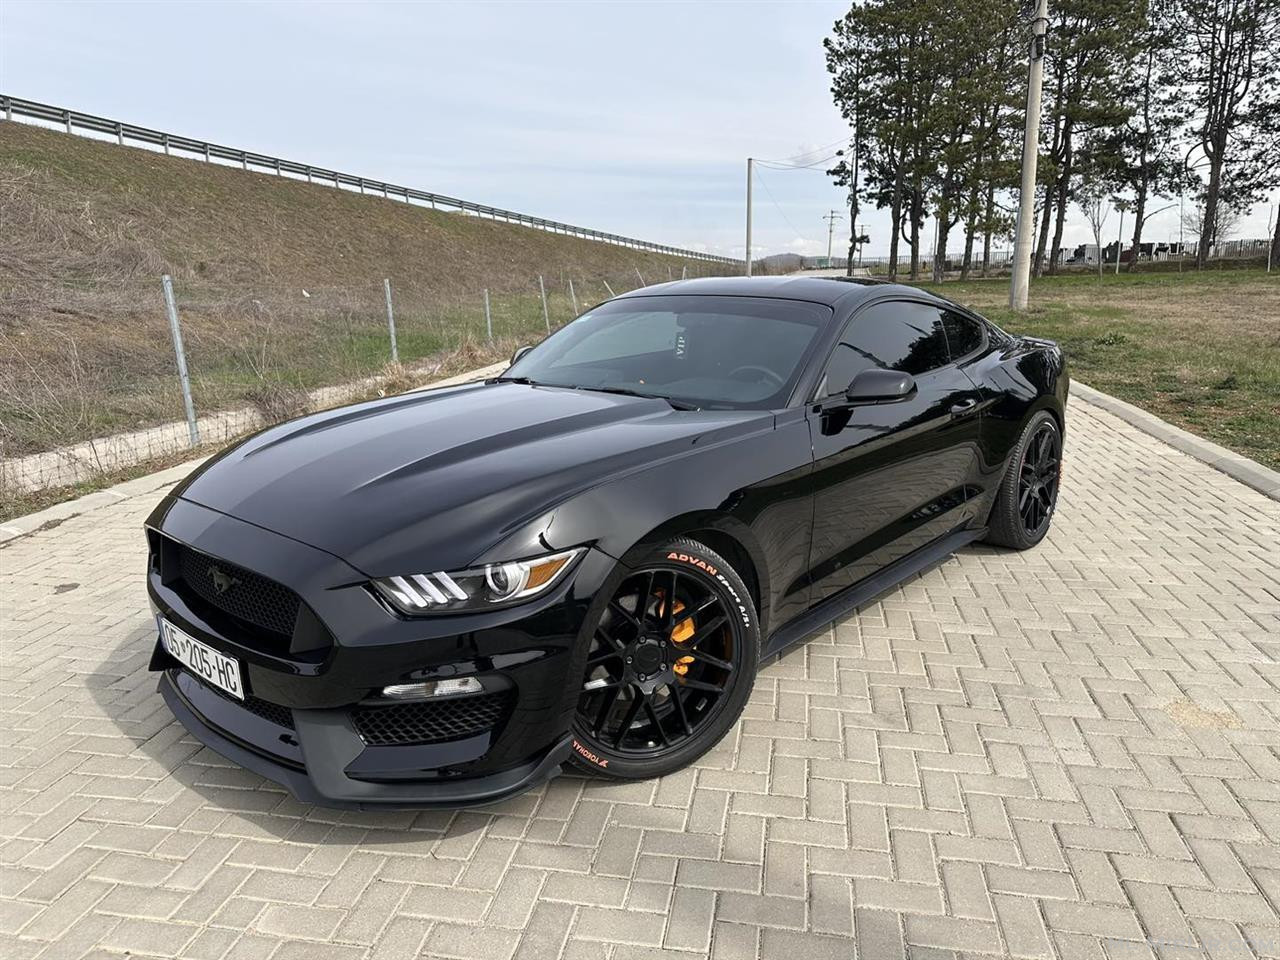 Shes Ford Mustang 3.7 v6 2017 